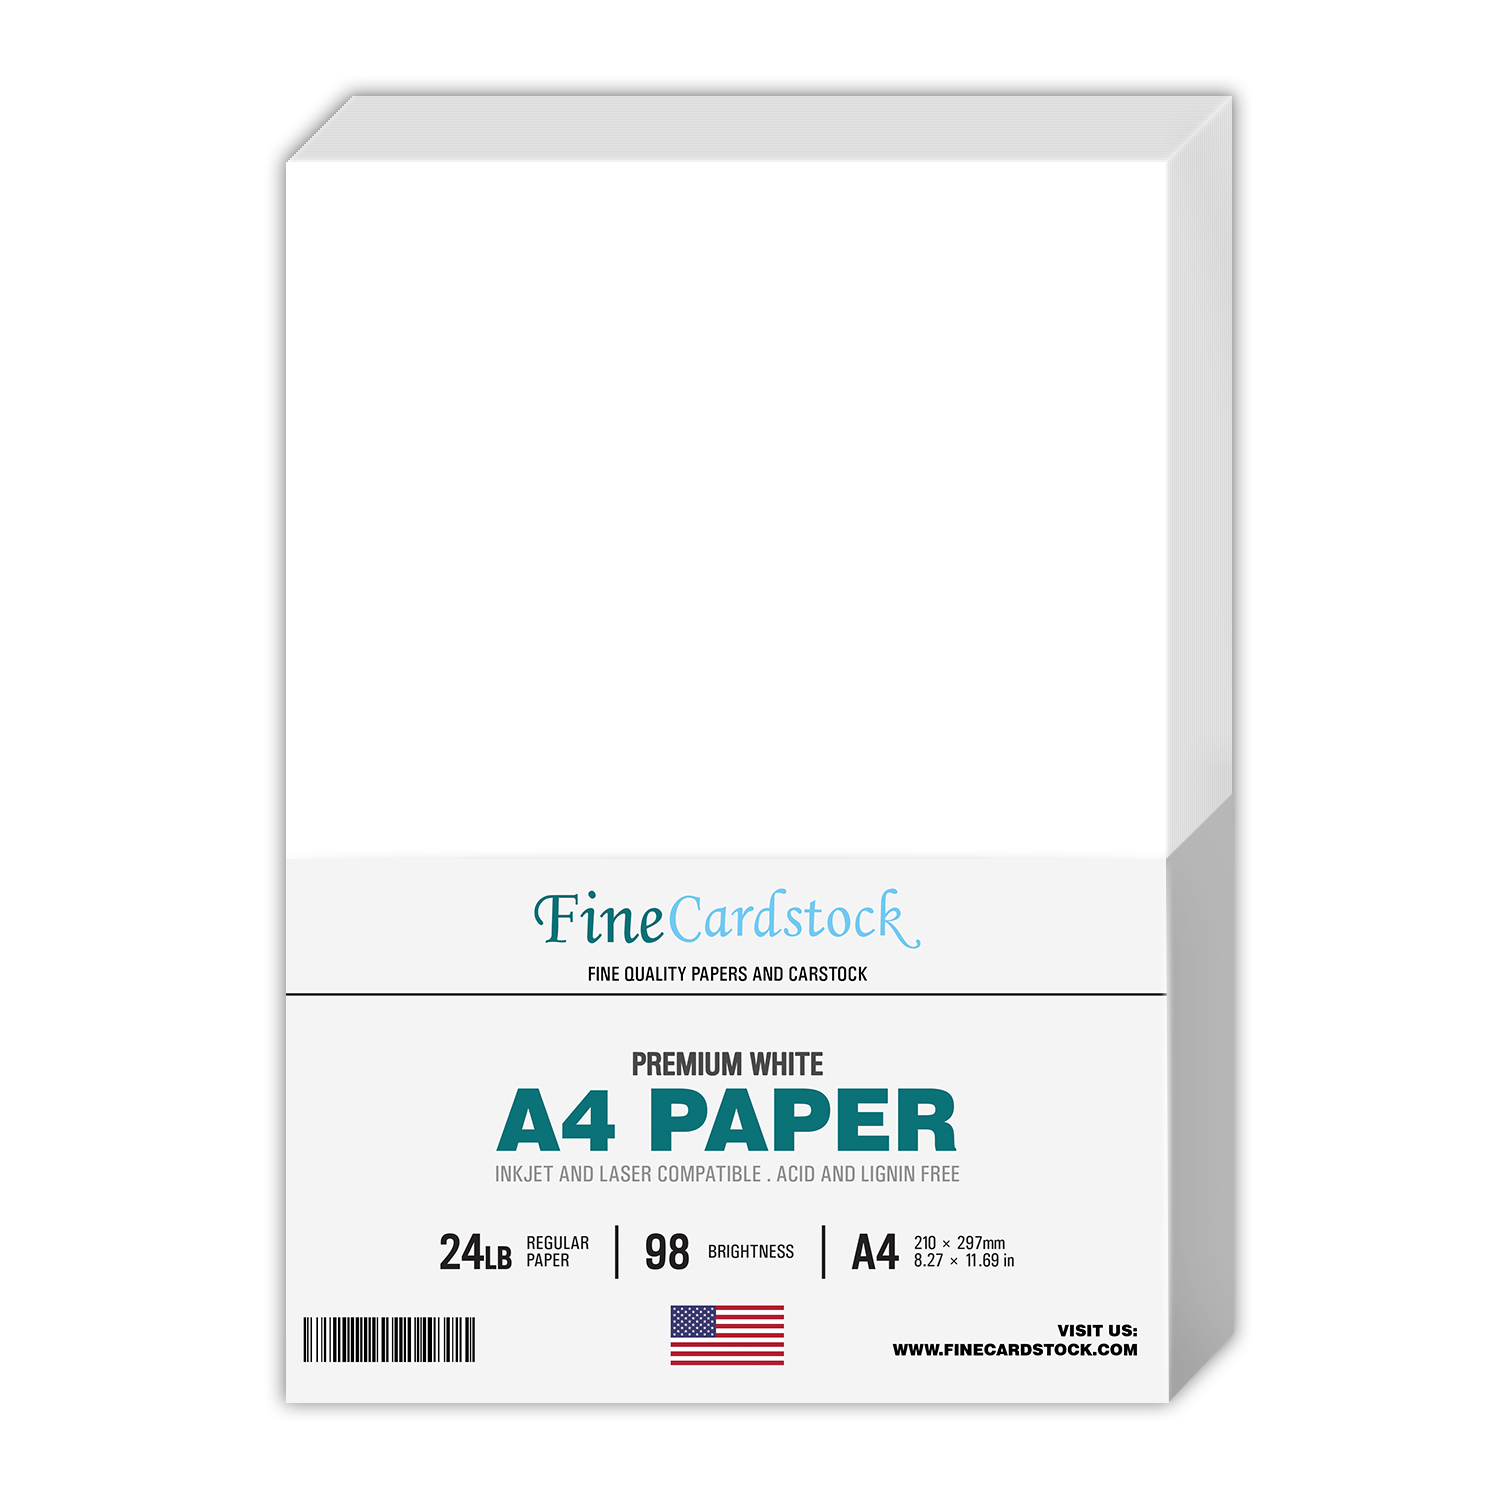  Half Letter Size Paper – Great for Business Documents, Letters,  Arts, Prints and Crafts, Copy, Printing, Writing, 8.5” x 5.5”, 20lb White  Bond Paper